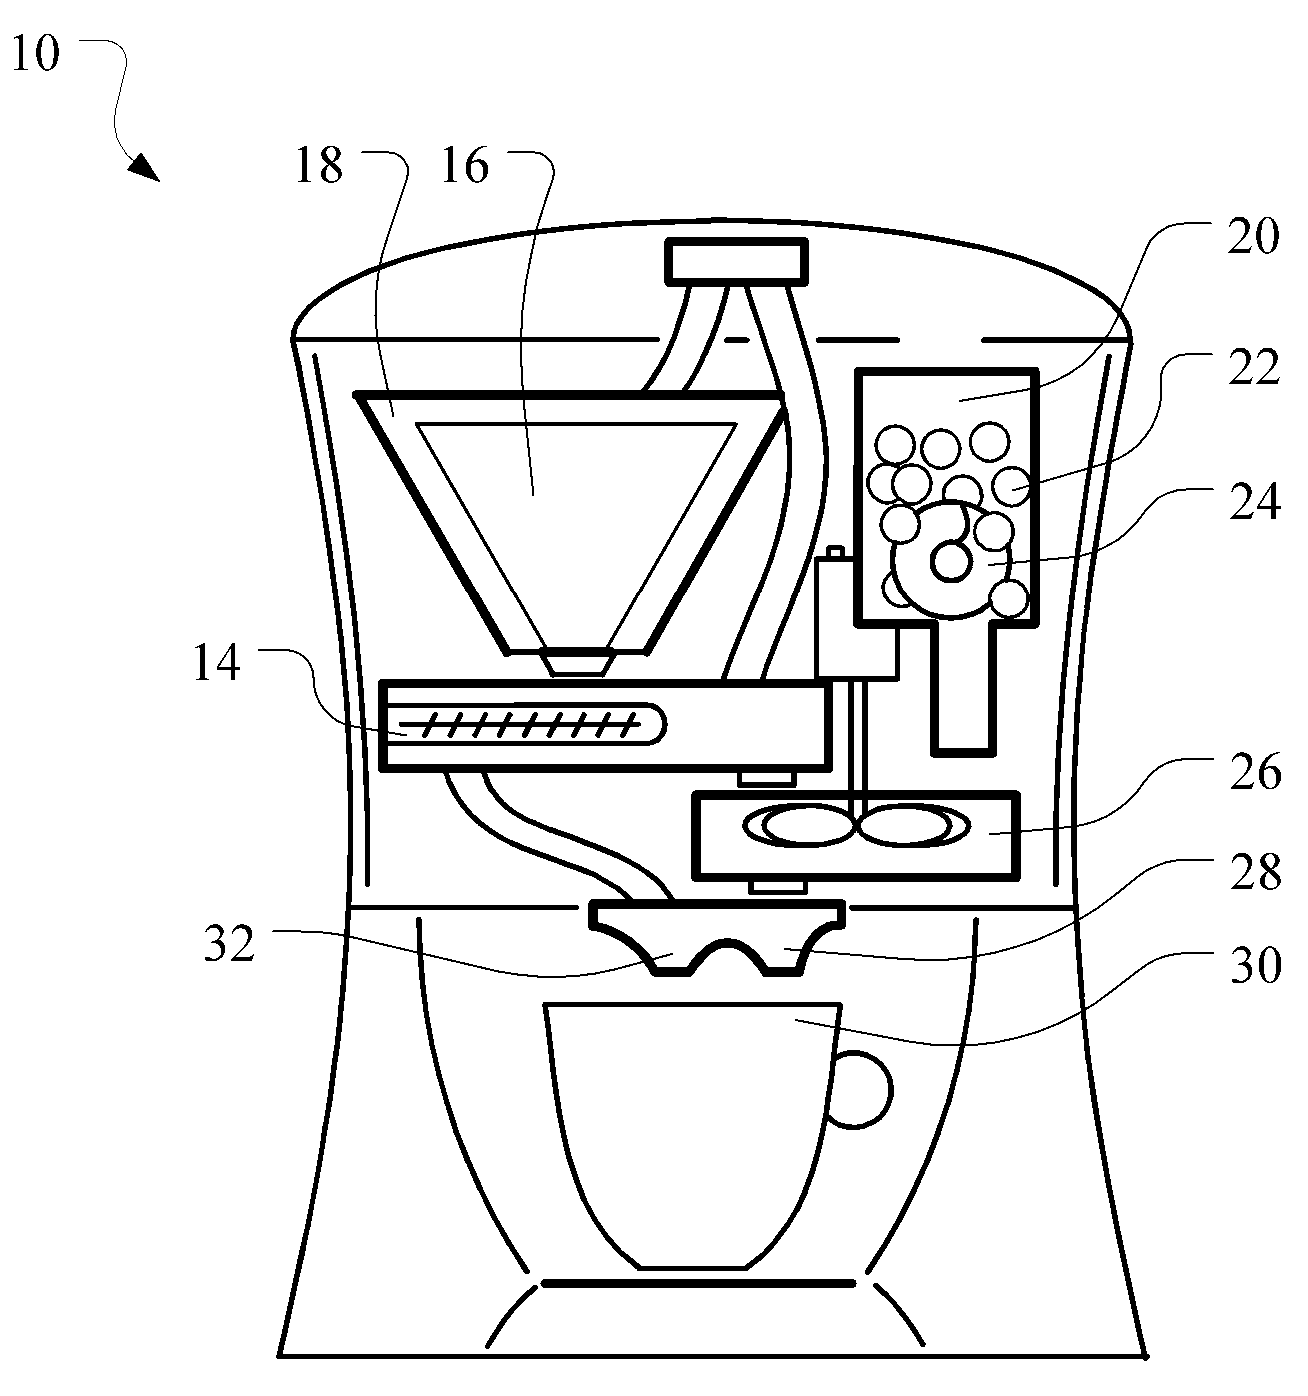 Household coffee and hot beverage dispenser